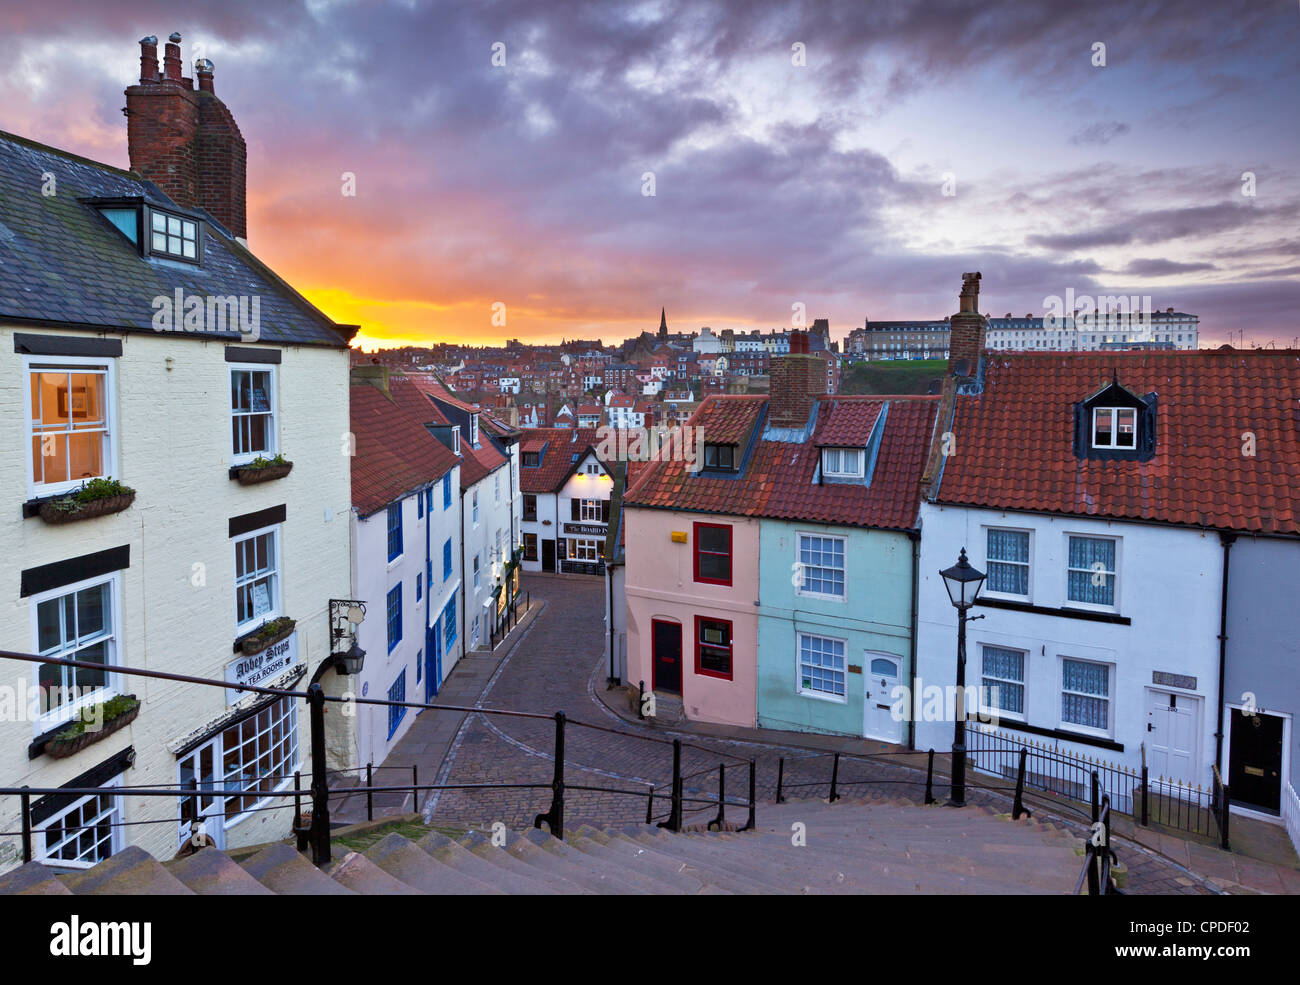 Whitby town houses at sunset from the Abbey steps, Whitby, North Yorkshire, Yorkshire, England, United Kingdom, Europe Stock Photo